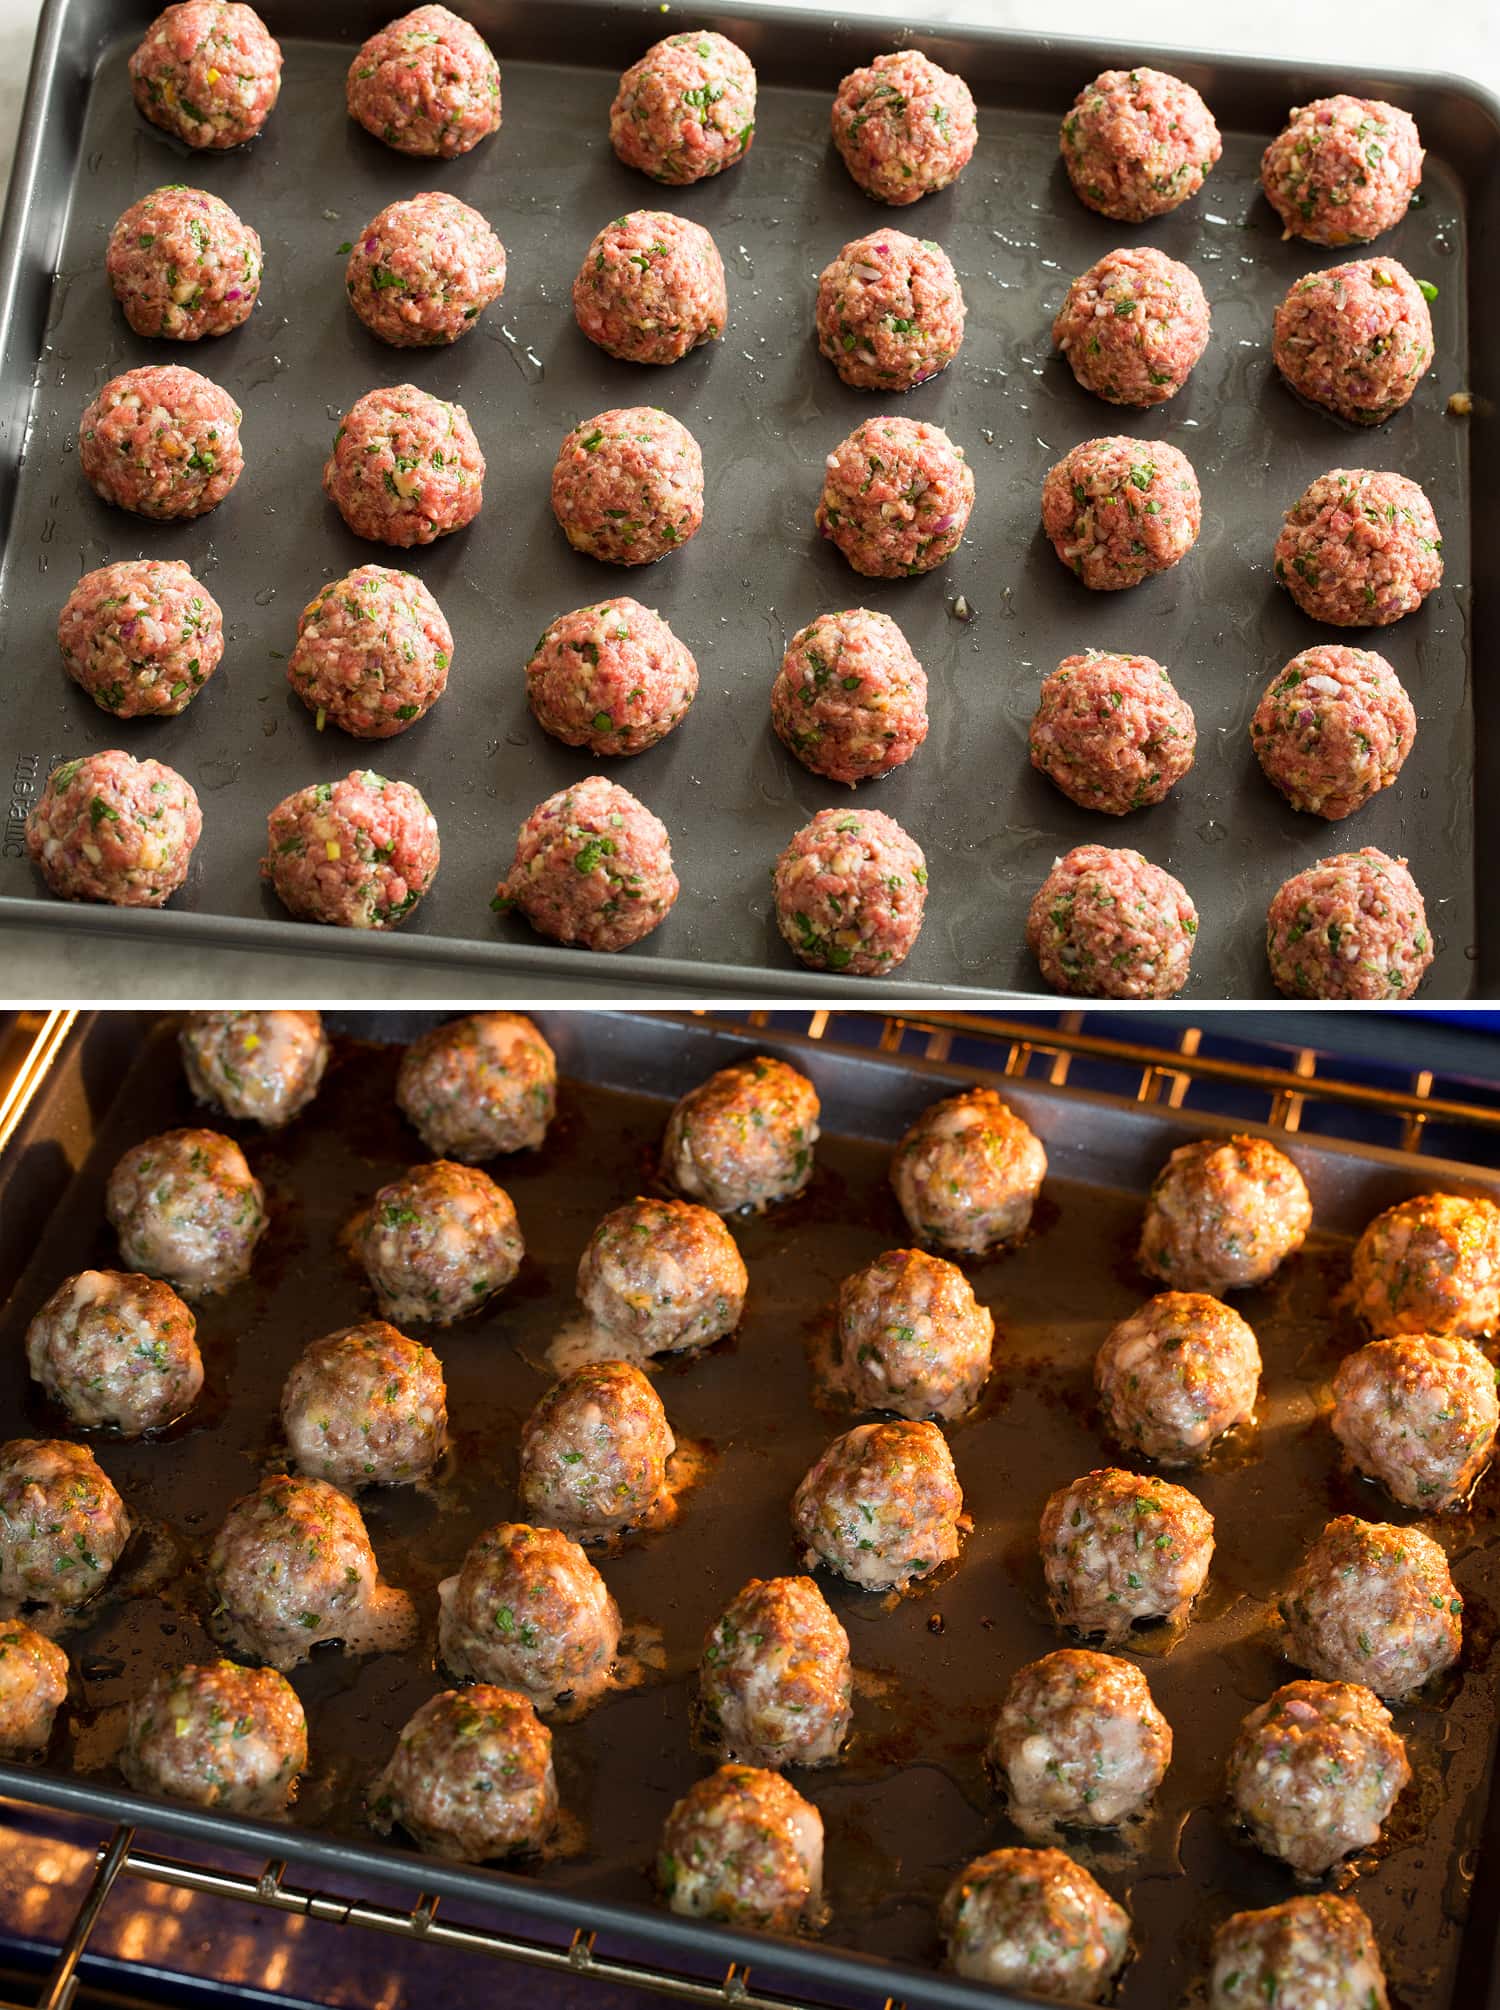 Meatballs on a baking sheet shown formed and also after baking.